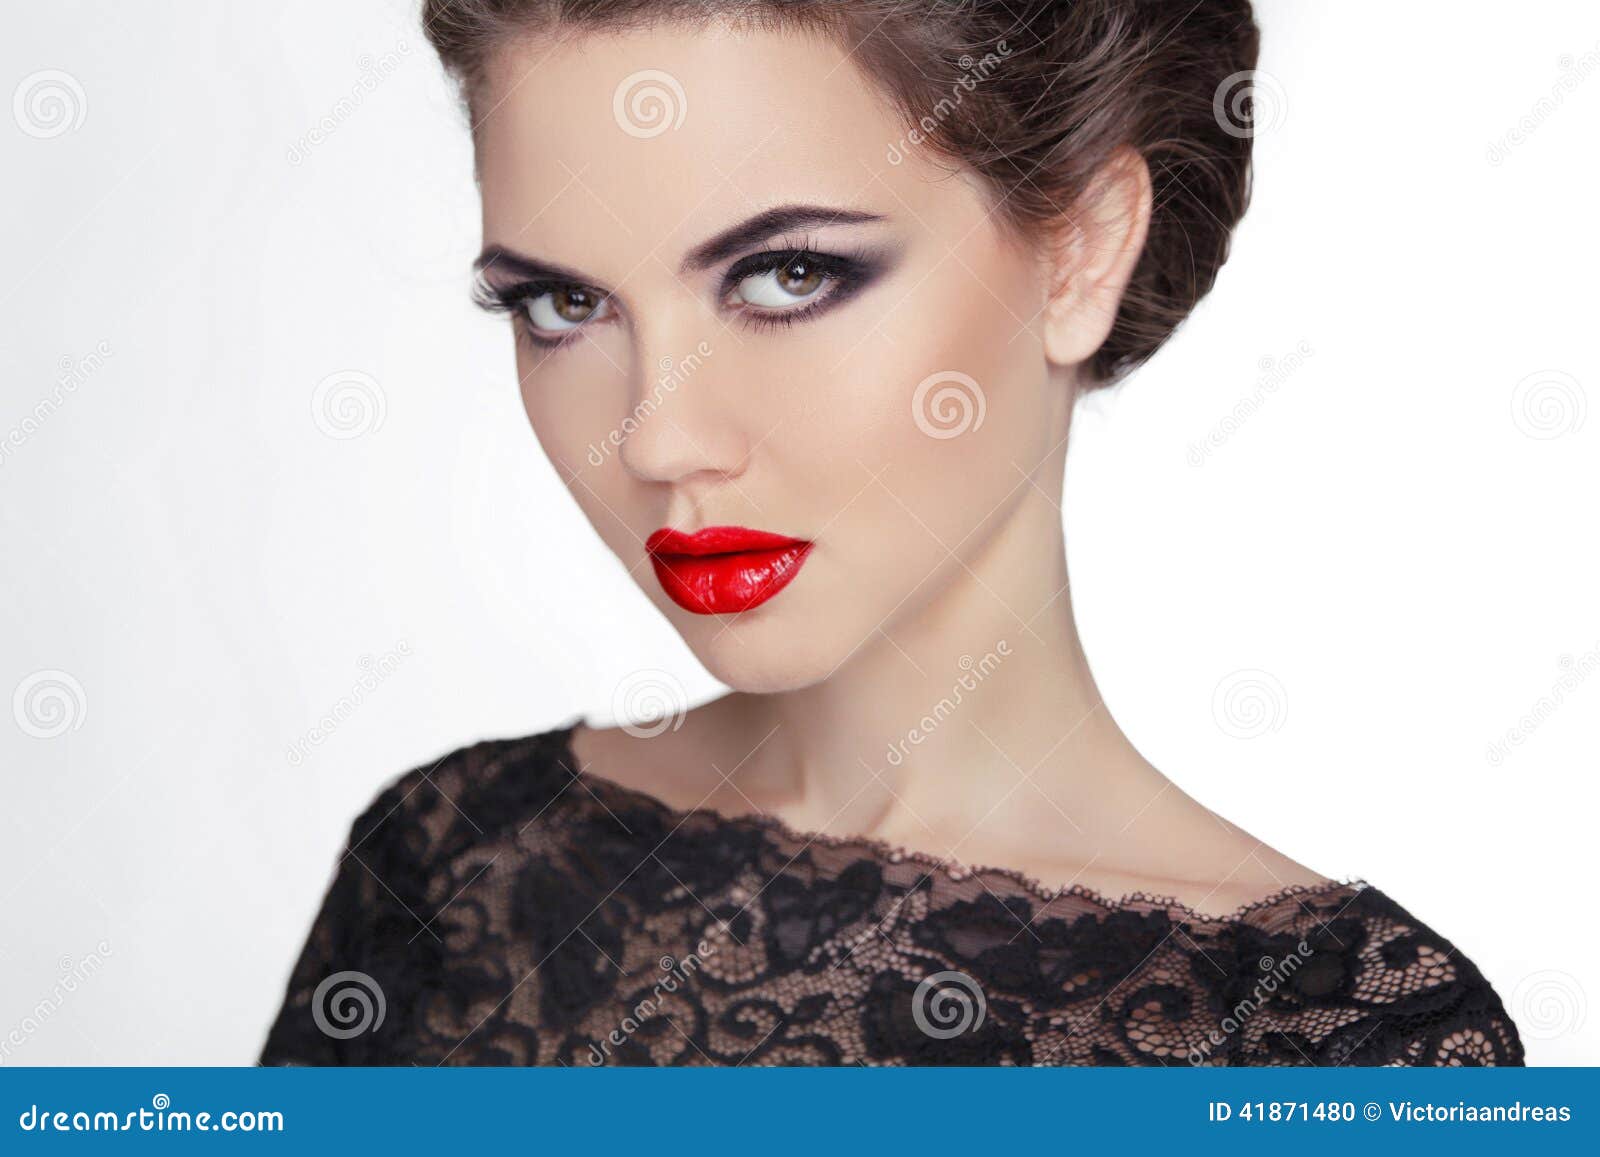 woman. makeup. stare. vintage style mysterious lady. retro female